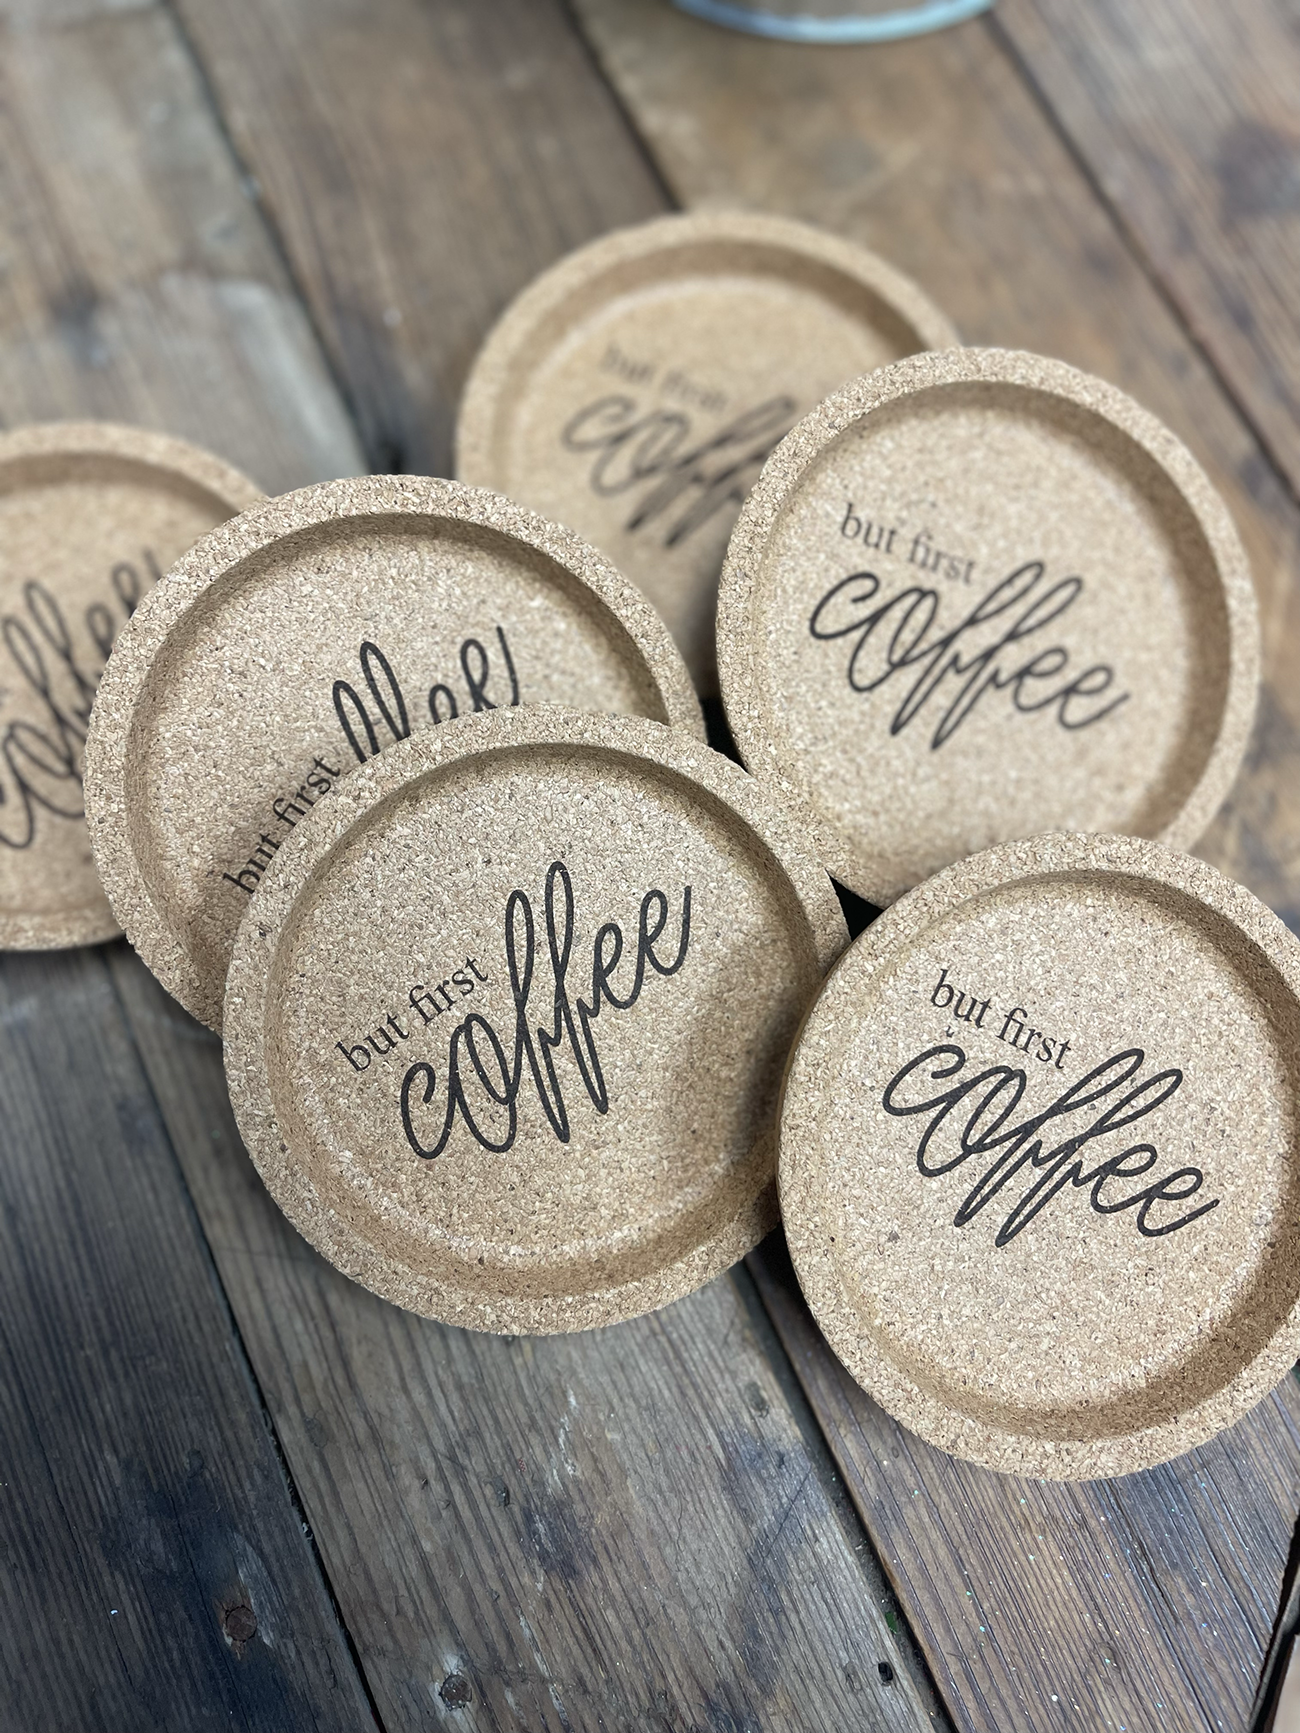 "BUT FIRST COFFEE" CORK COASTERS